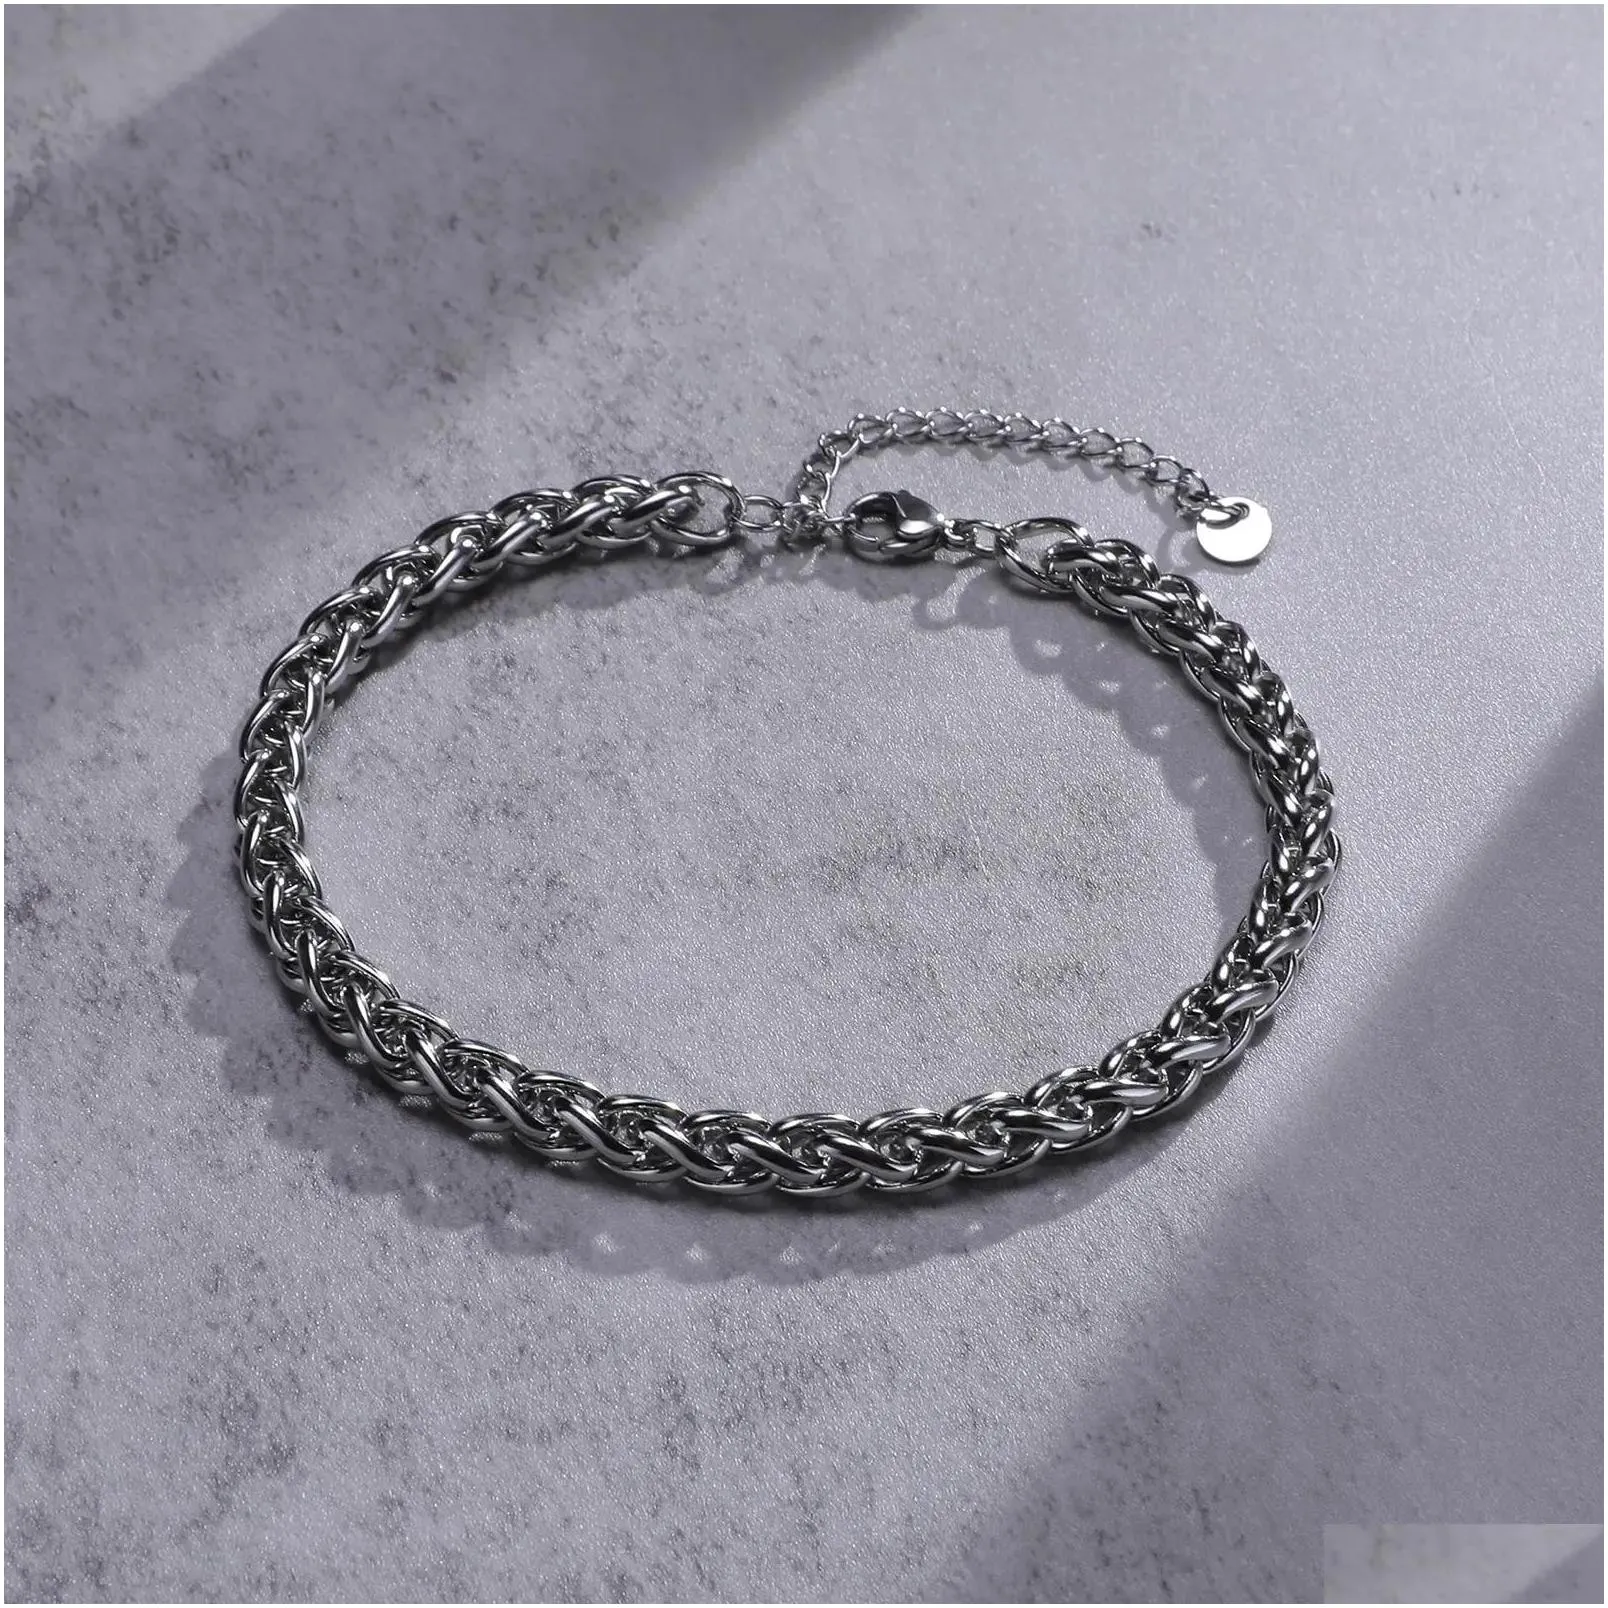 Waterproof 14K White Gold Cuban Wheat Chain Anklet Bracelets for Men, Summer Holiday Beach Foot Gifts Jewelry,Length Adjustable